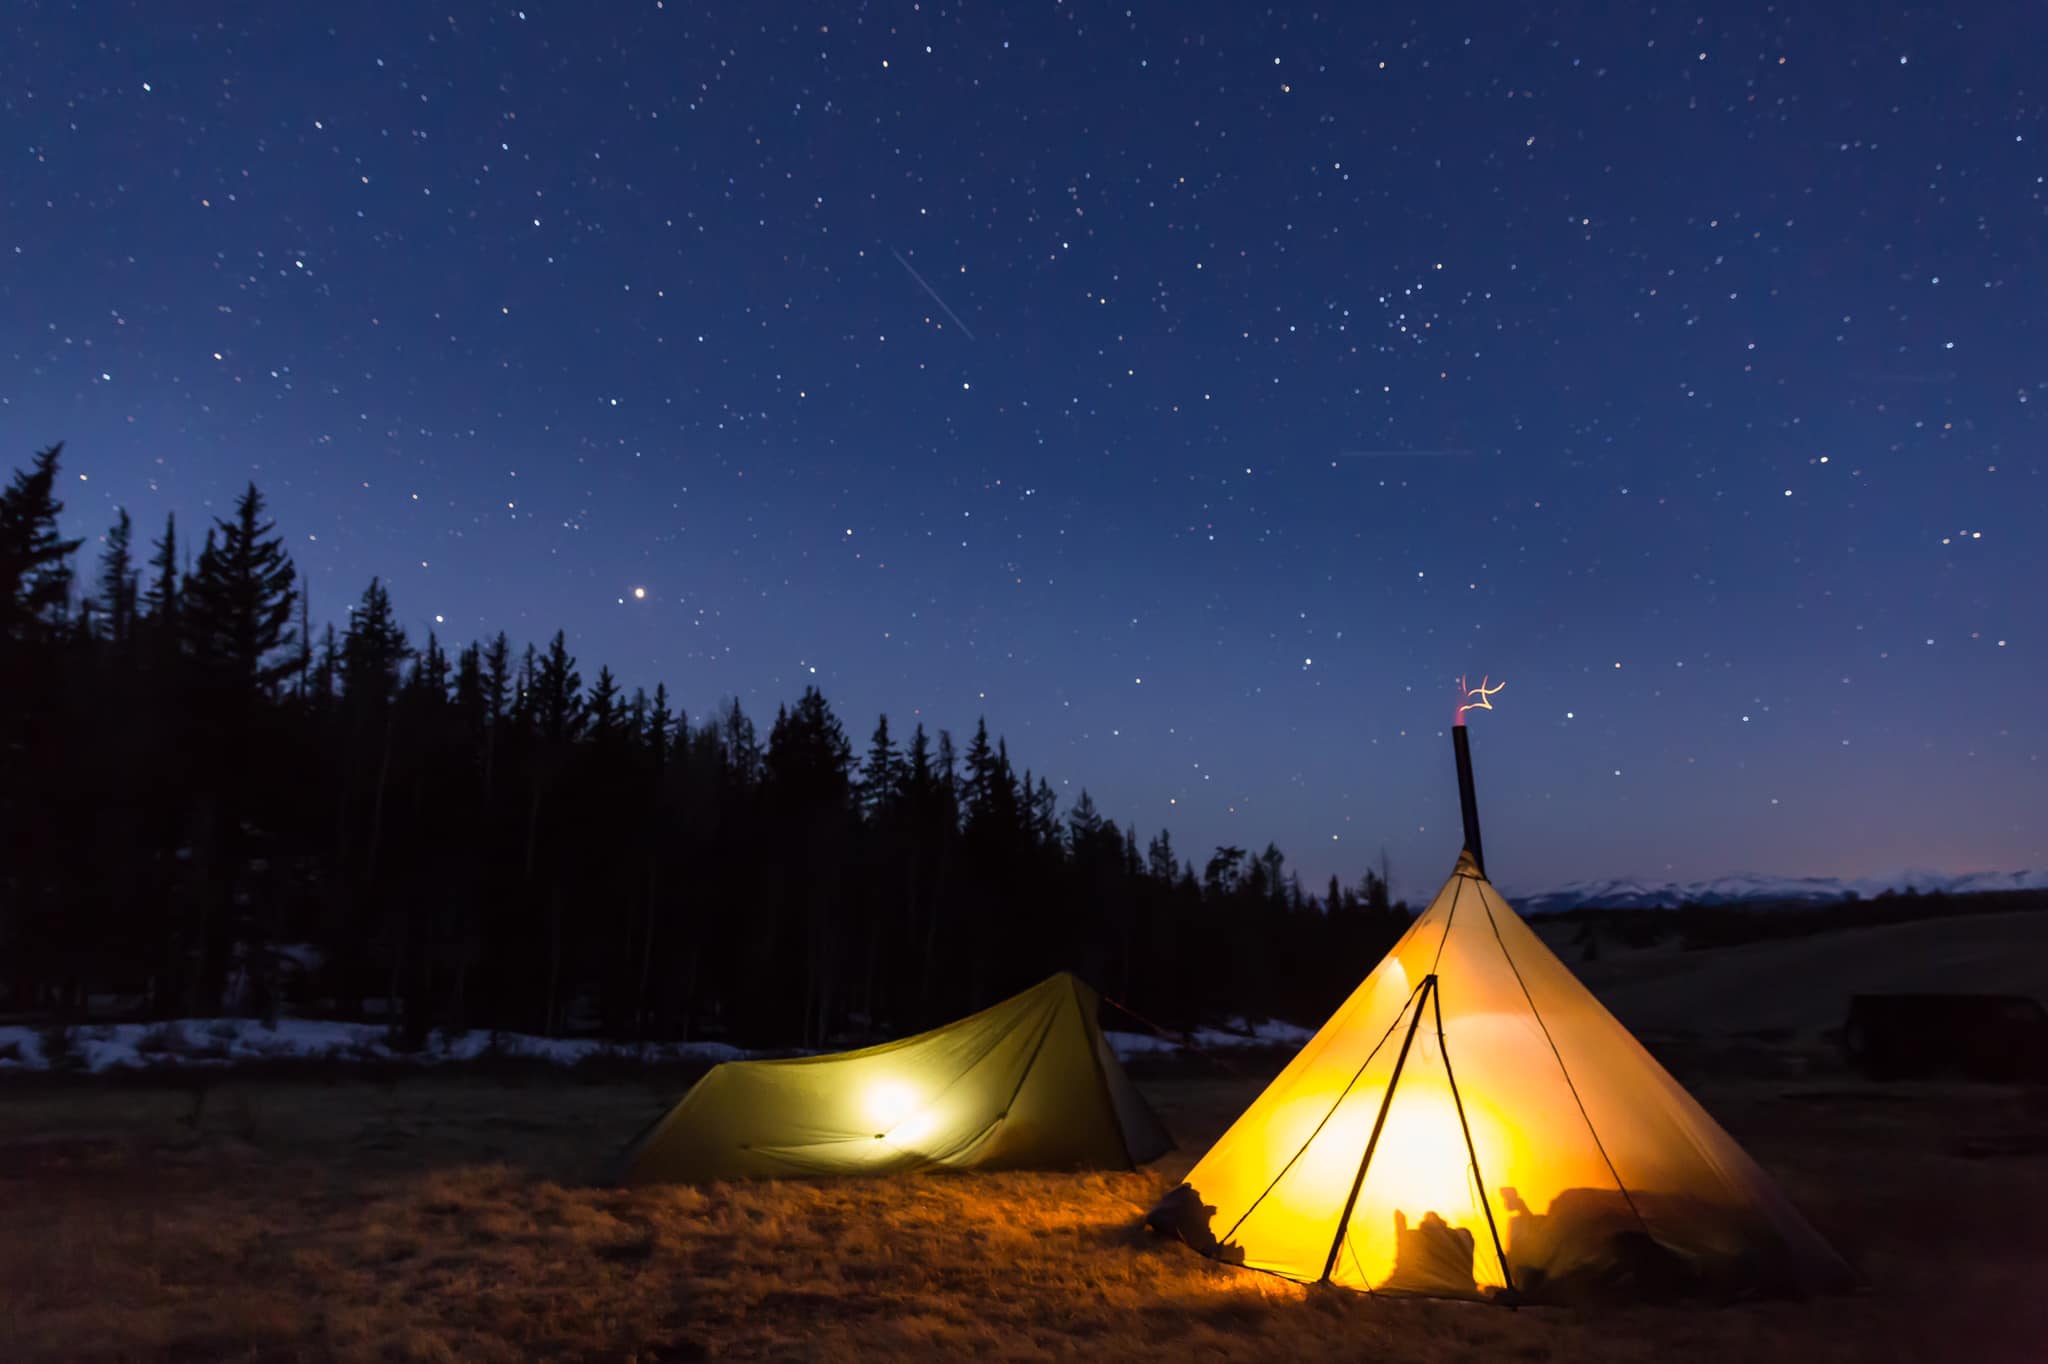 Kifaru is one of the best tent brands and they're known for their heated tents